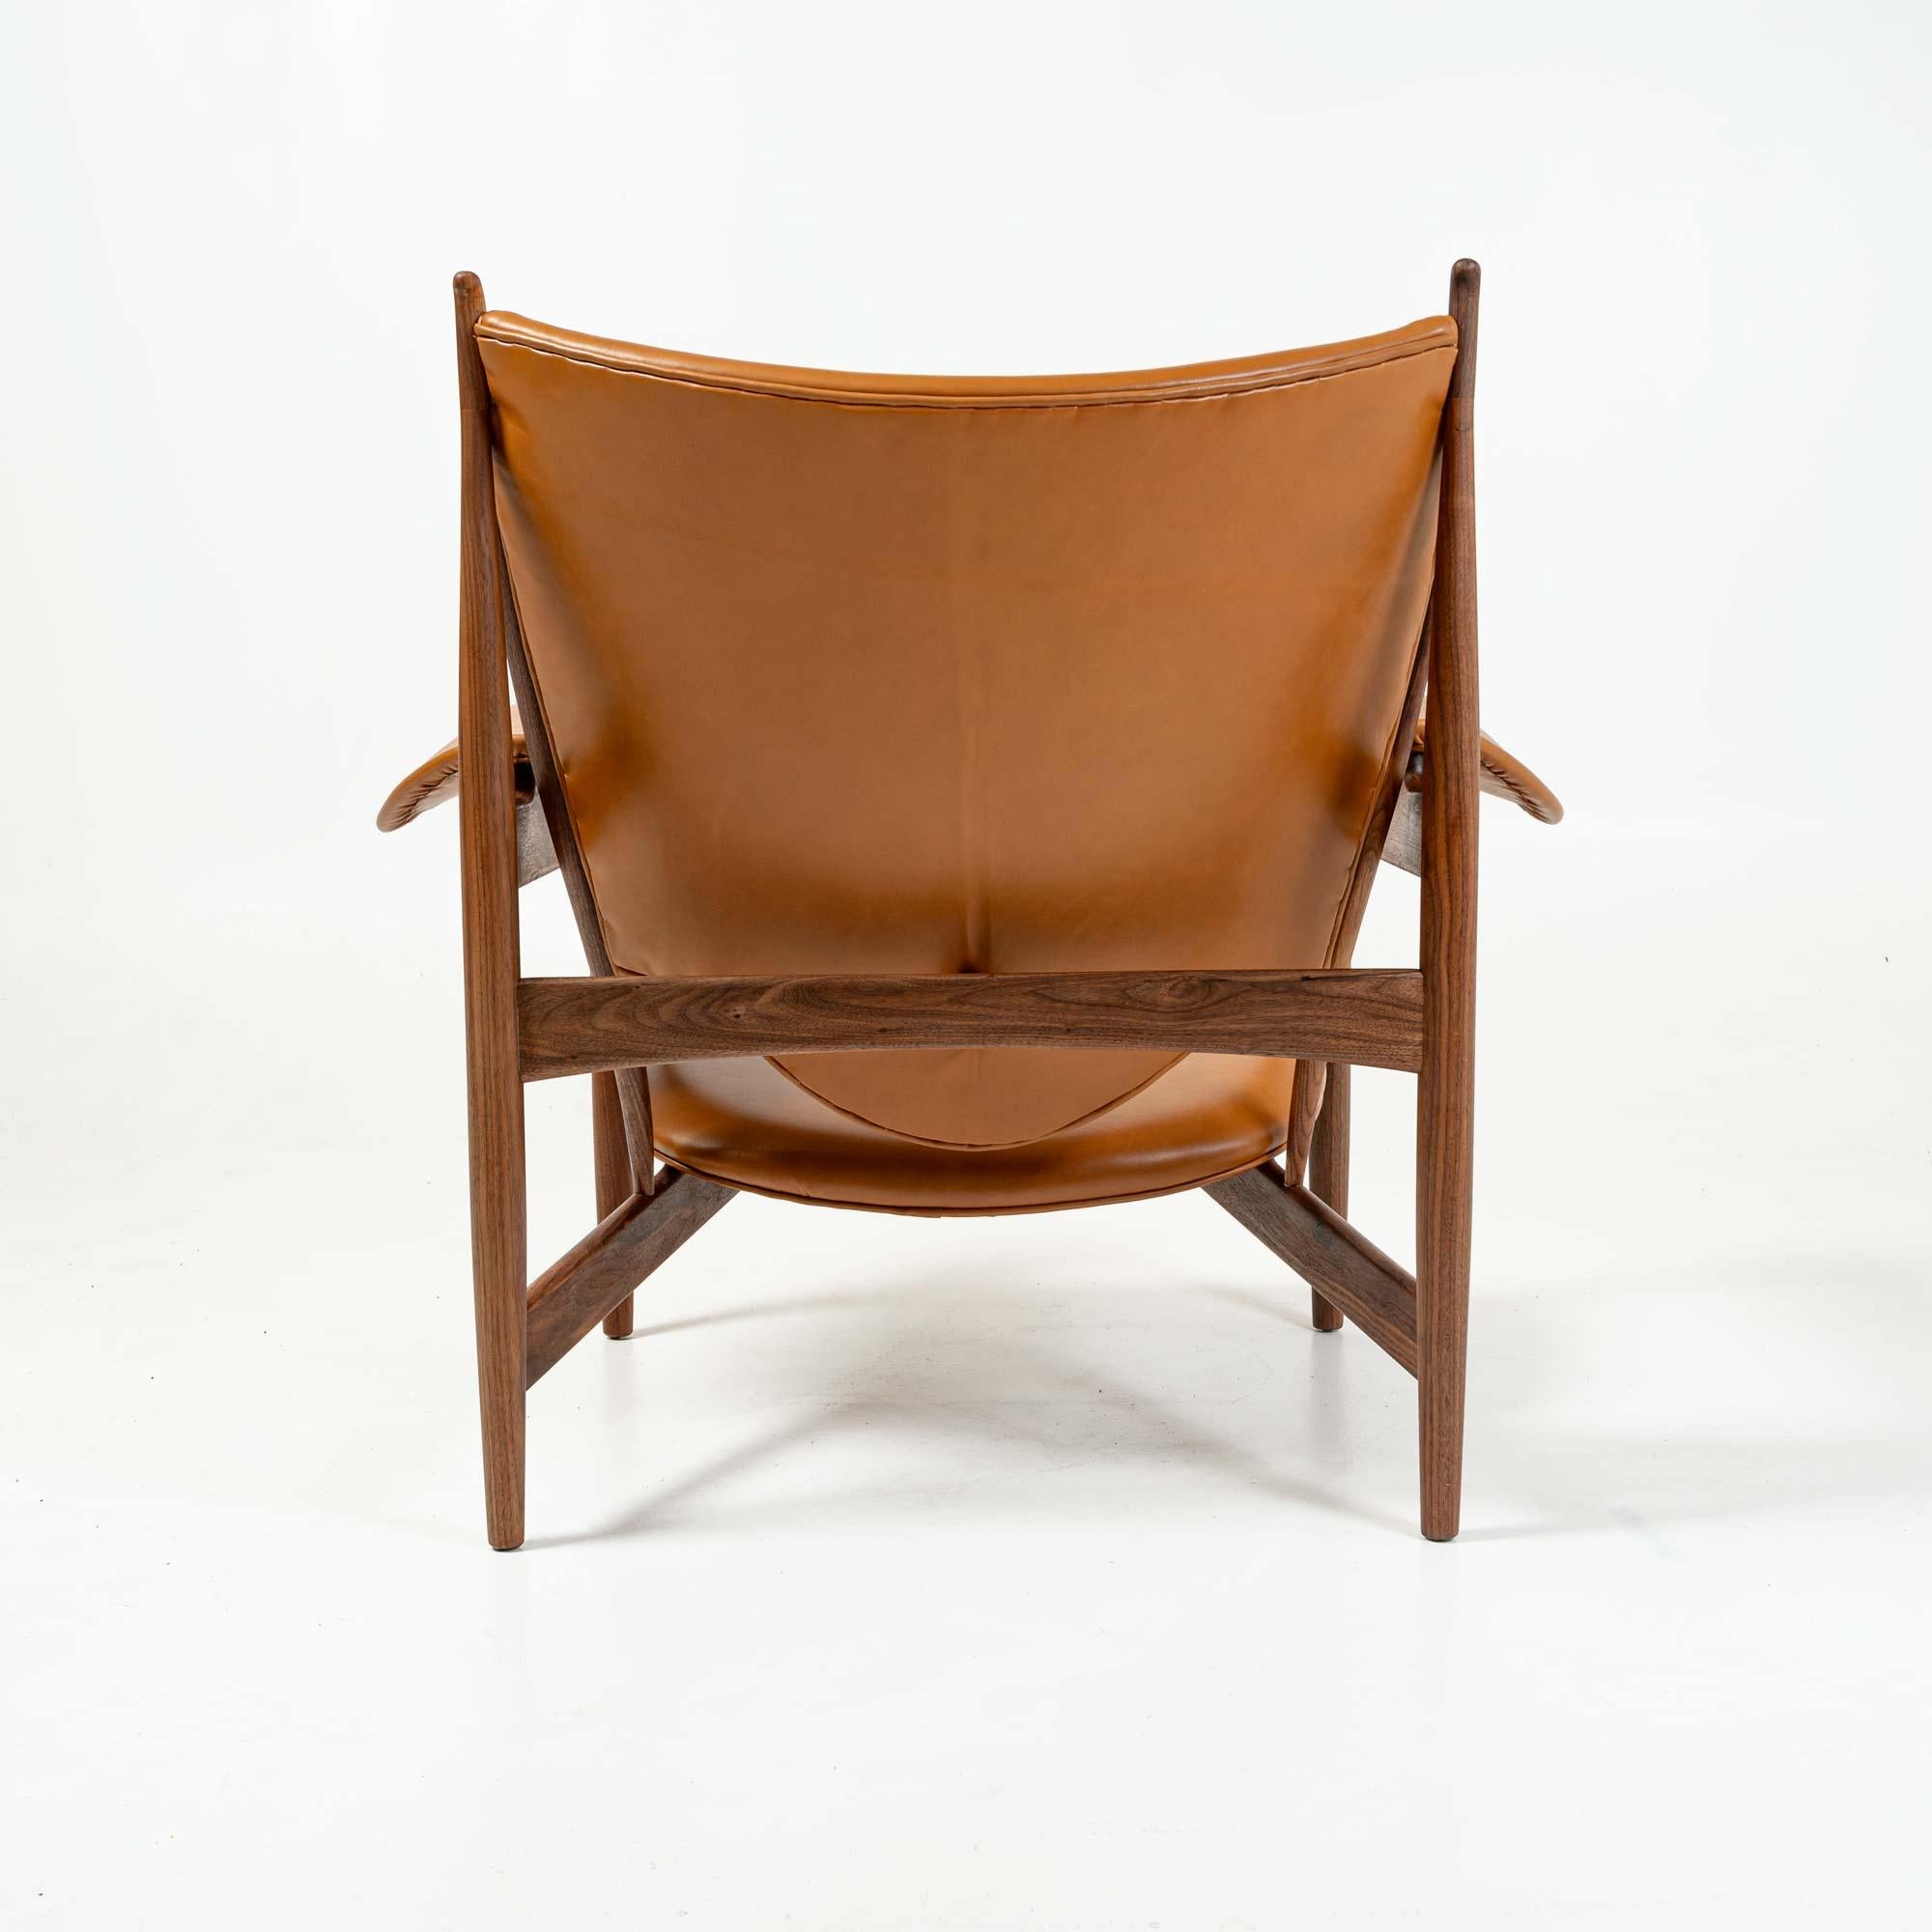 Late 20th Century Chieftain Chair by Finn Juhl for Baker Furniture 1997/8 edition  For Sale